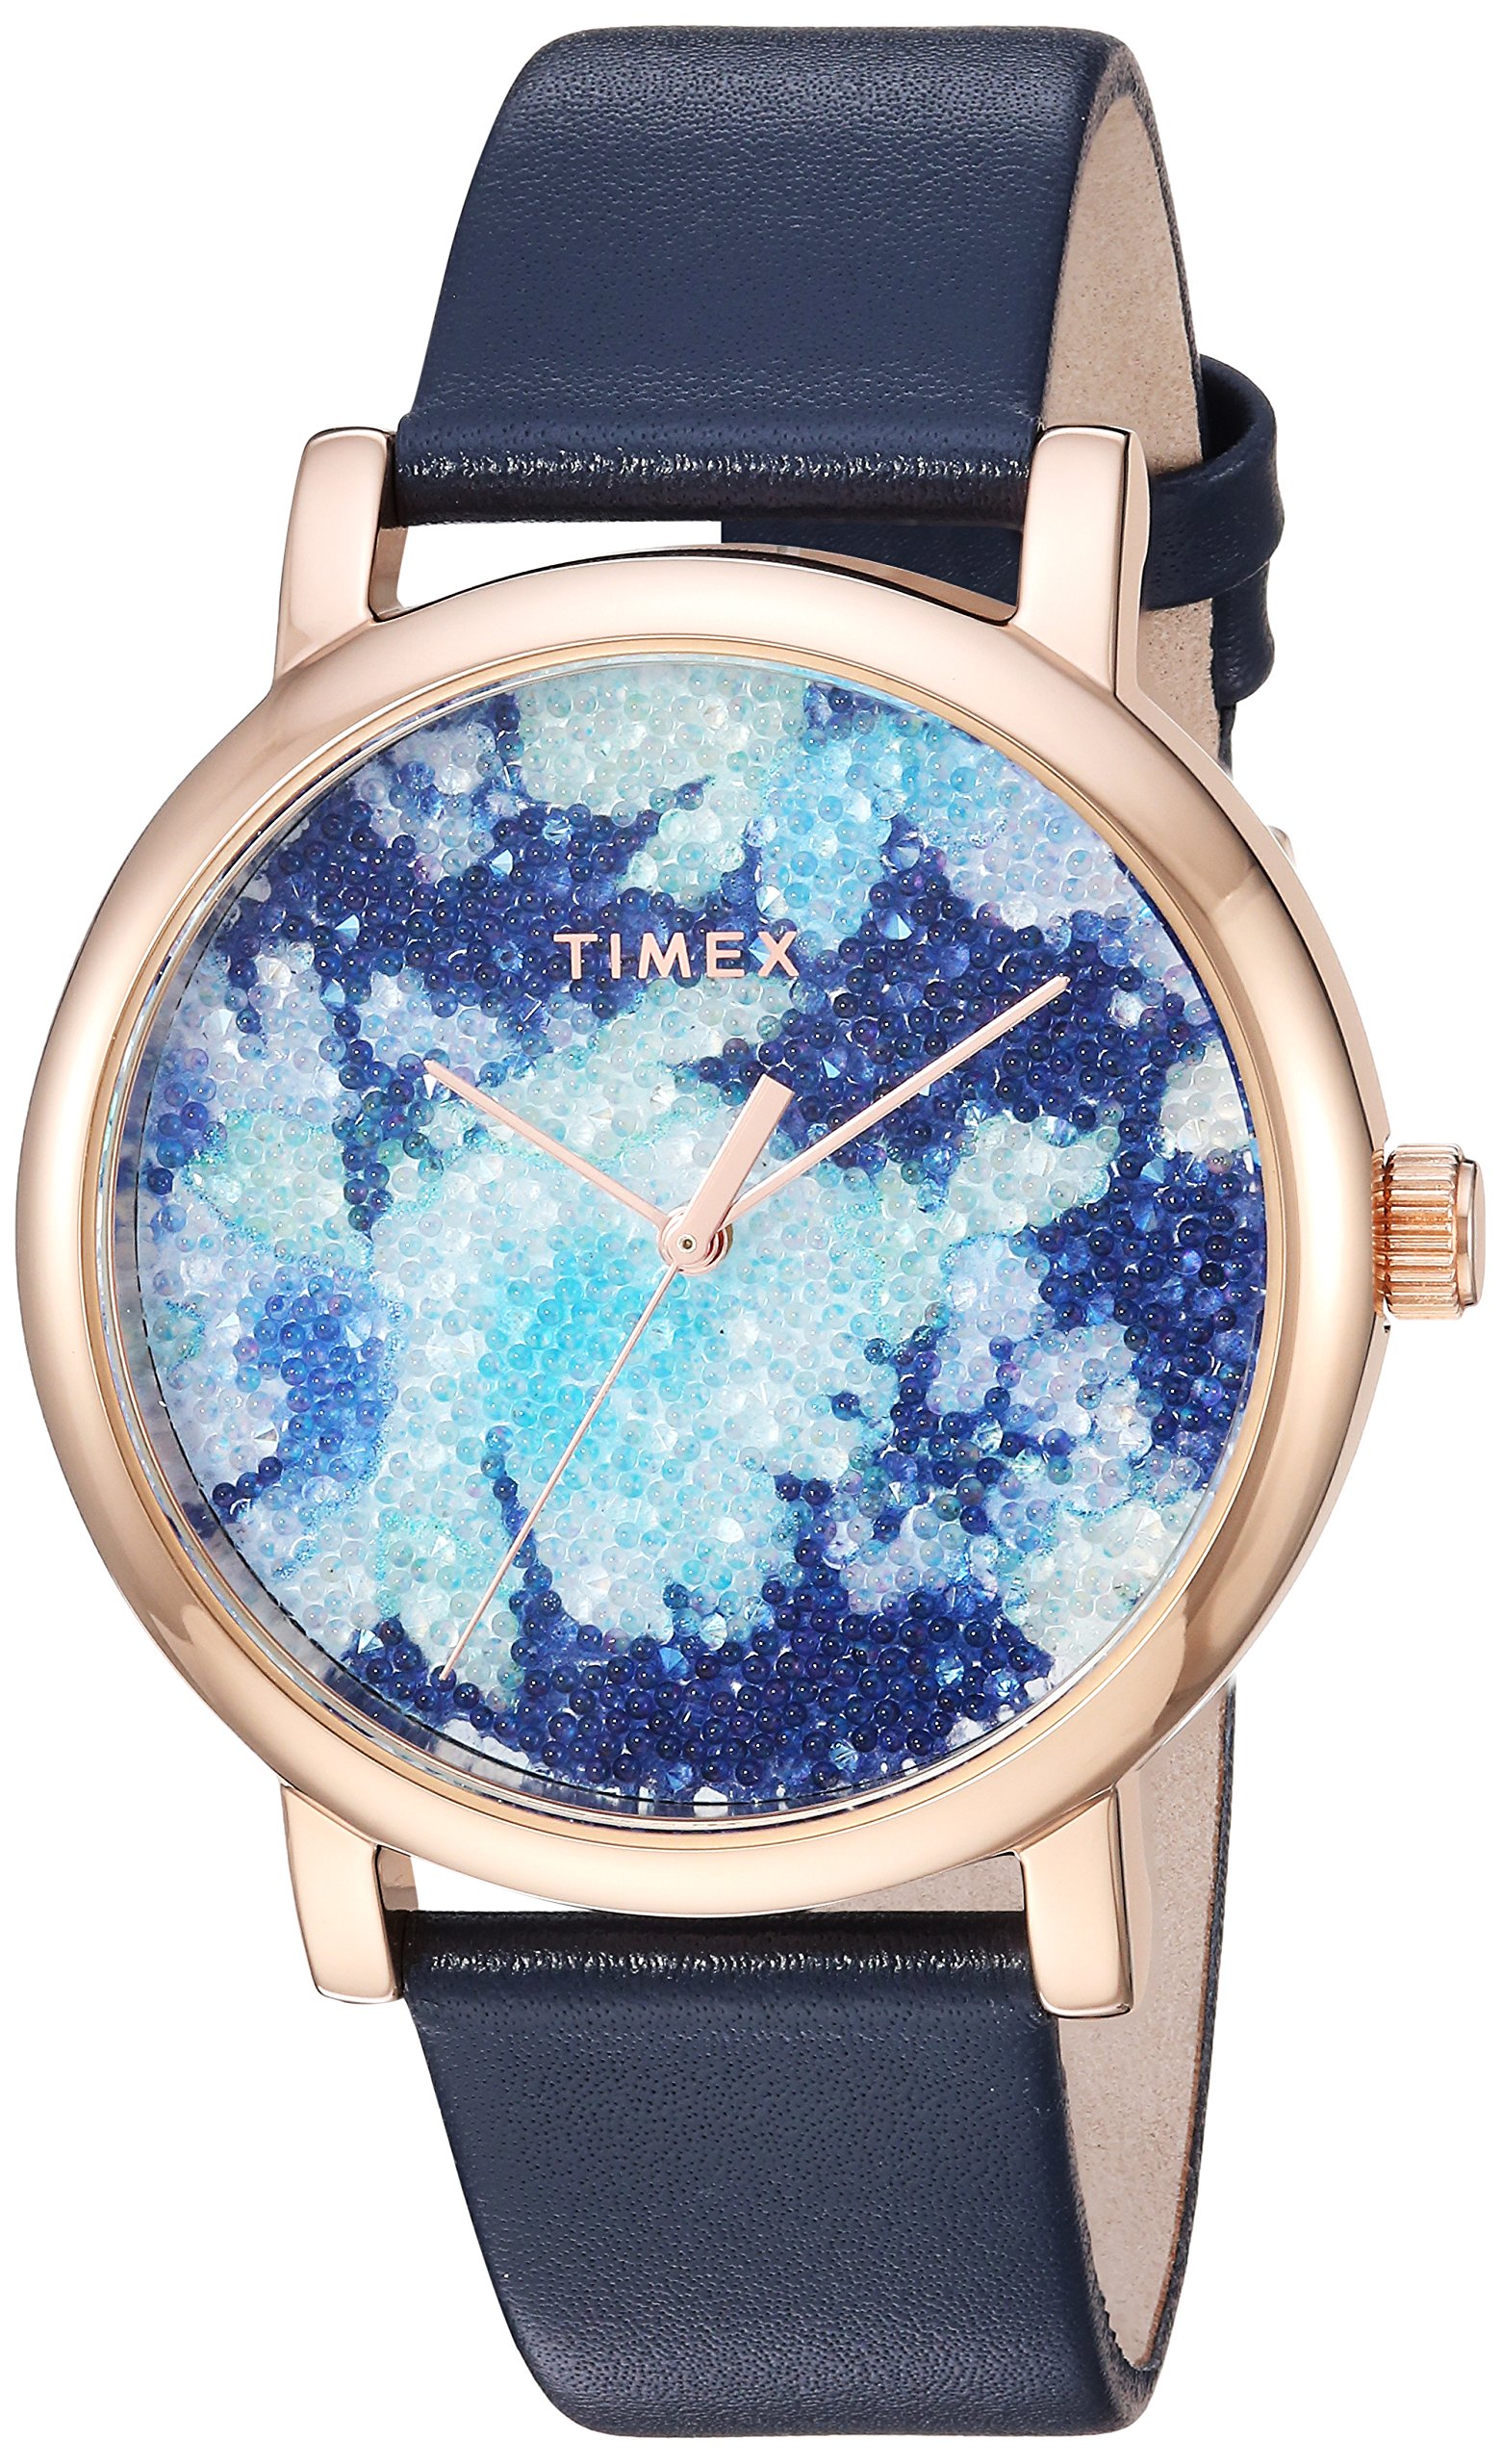 Timex Womens Crystal Bloom Blue/Rose Gold Floral Leather Strap Watch TW2R66400